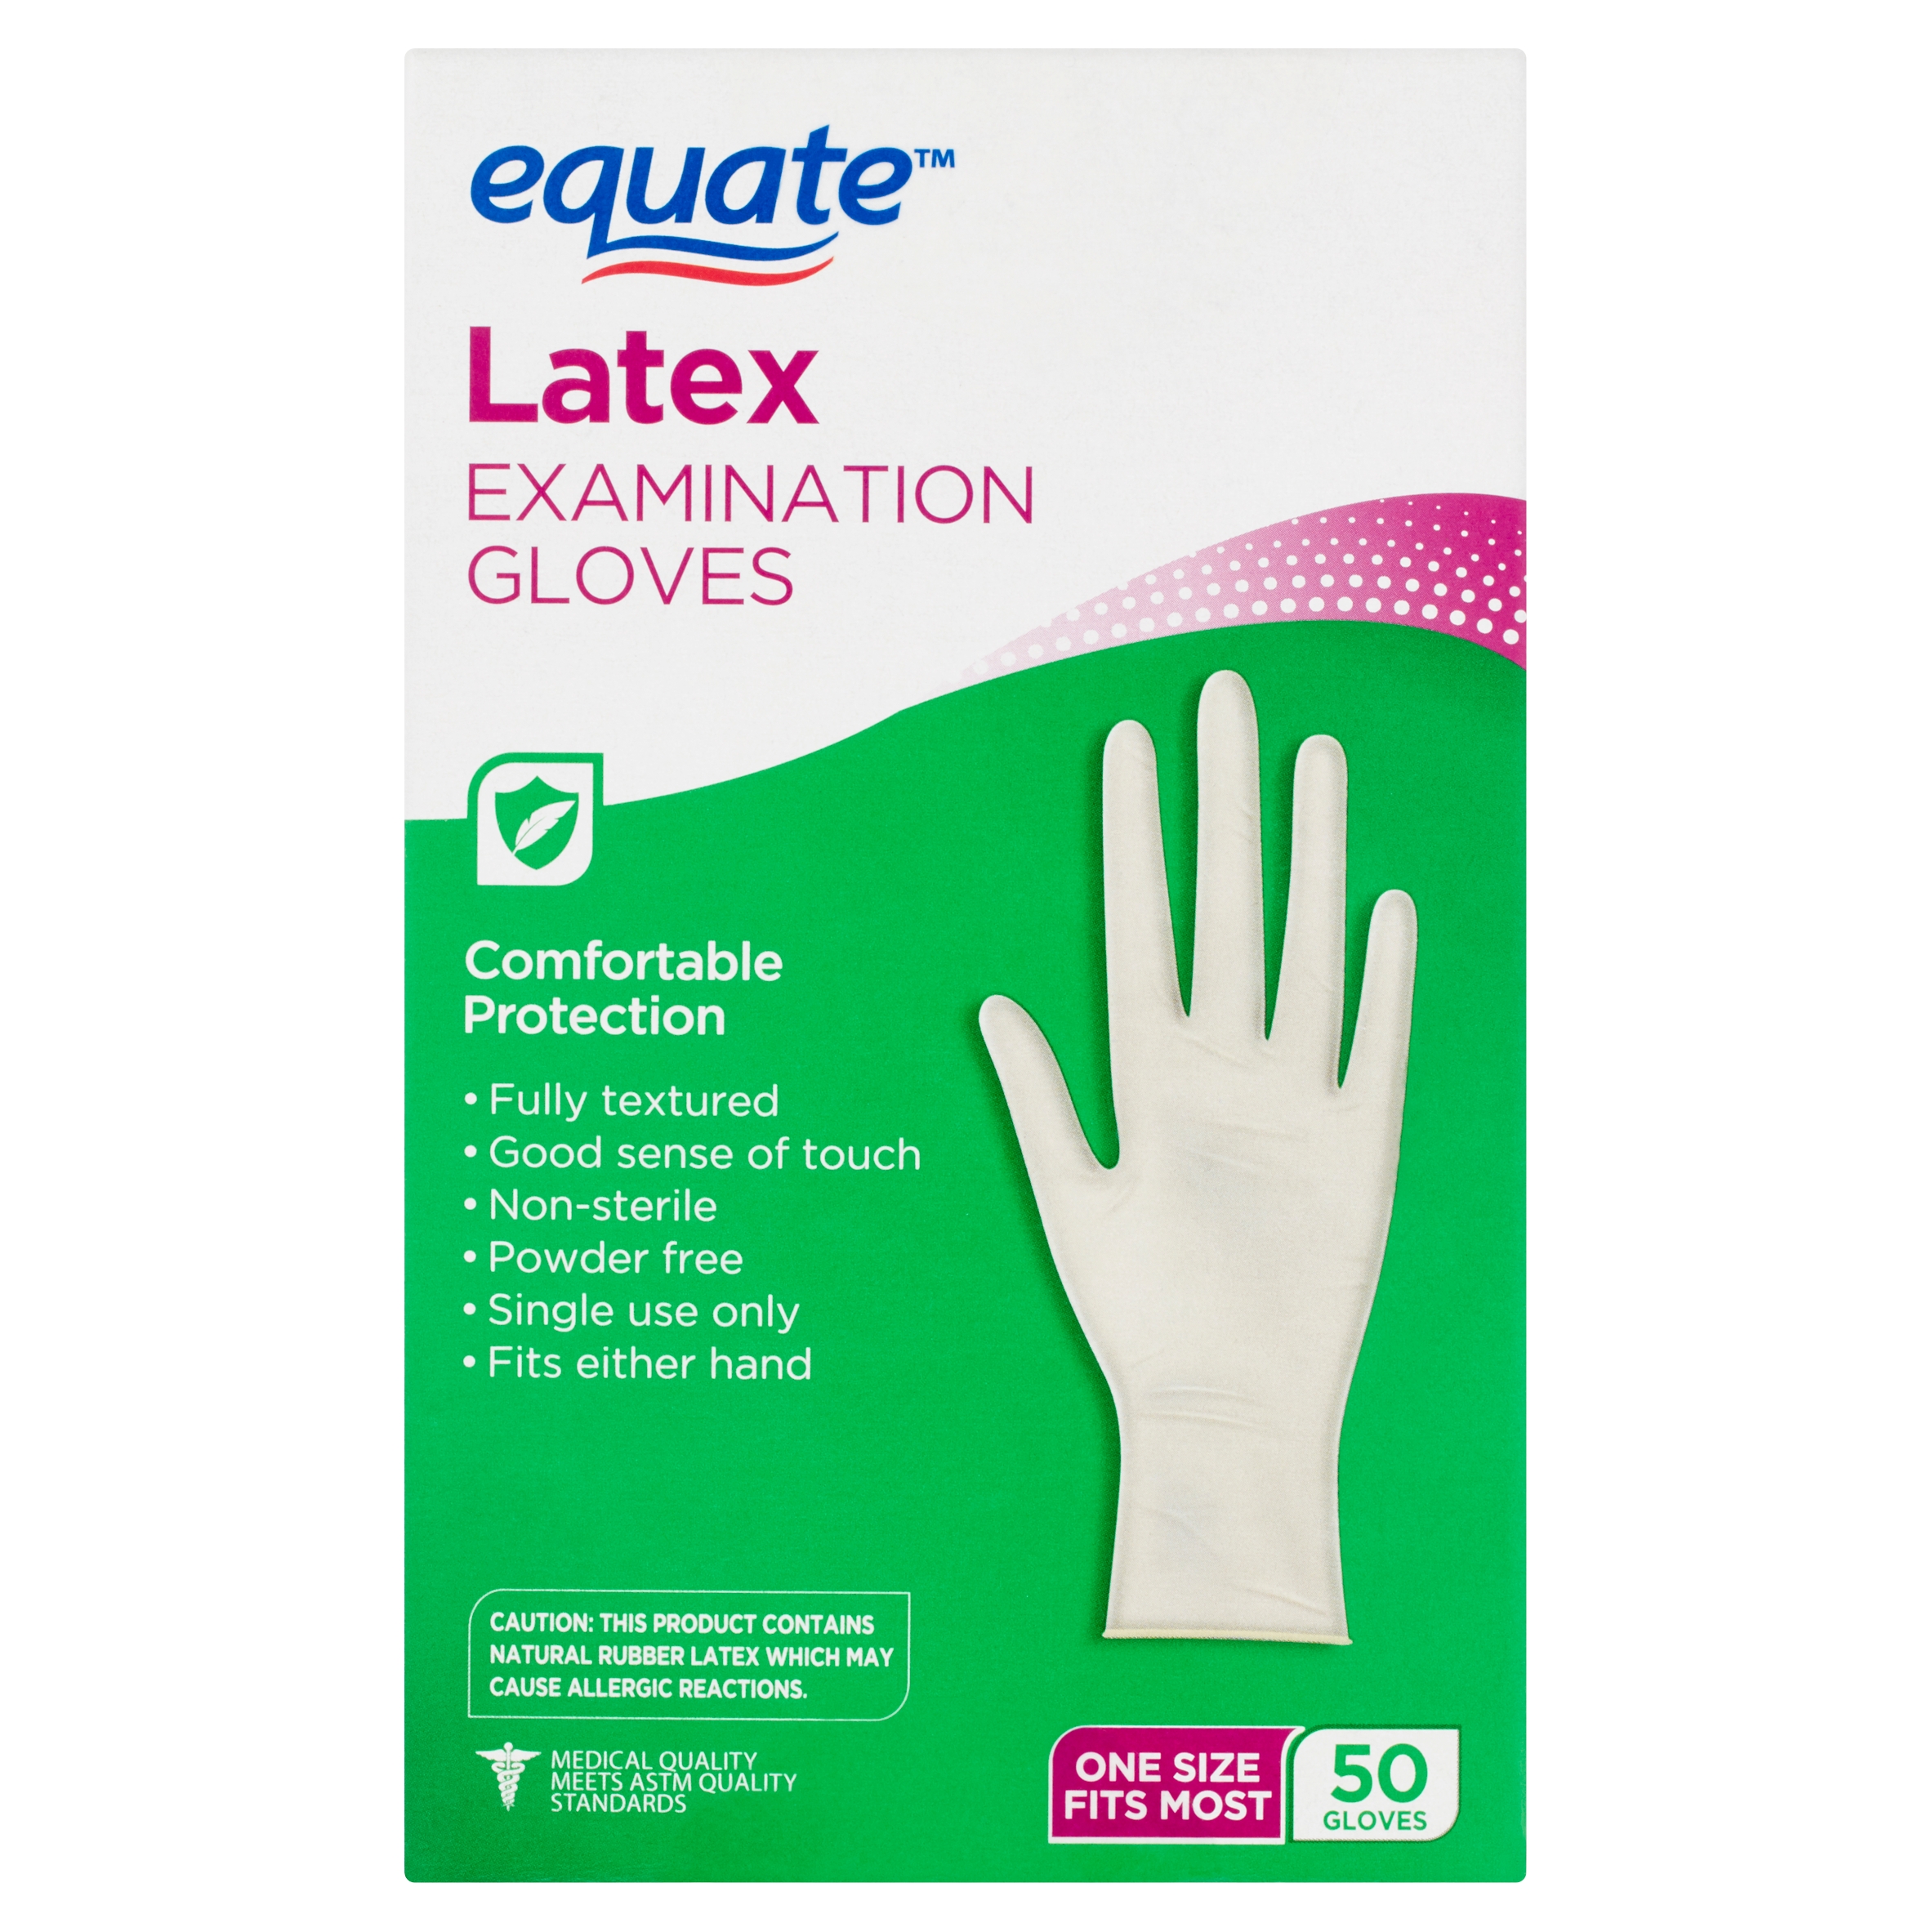 Equate Latex Examination Gloves, 50 Count - image 7 of 10